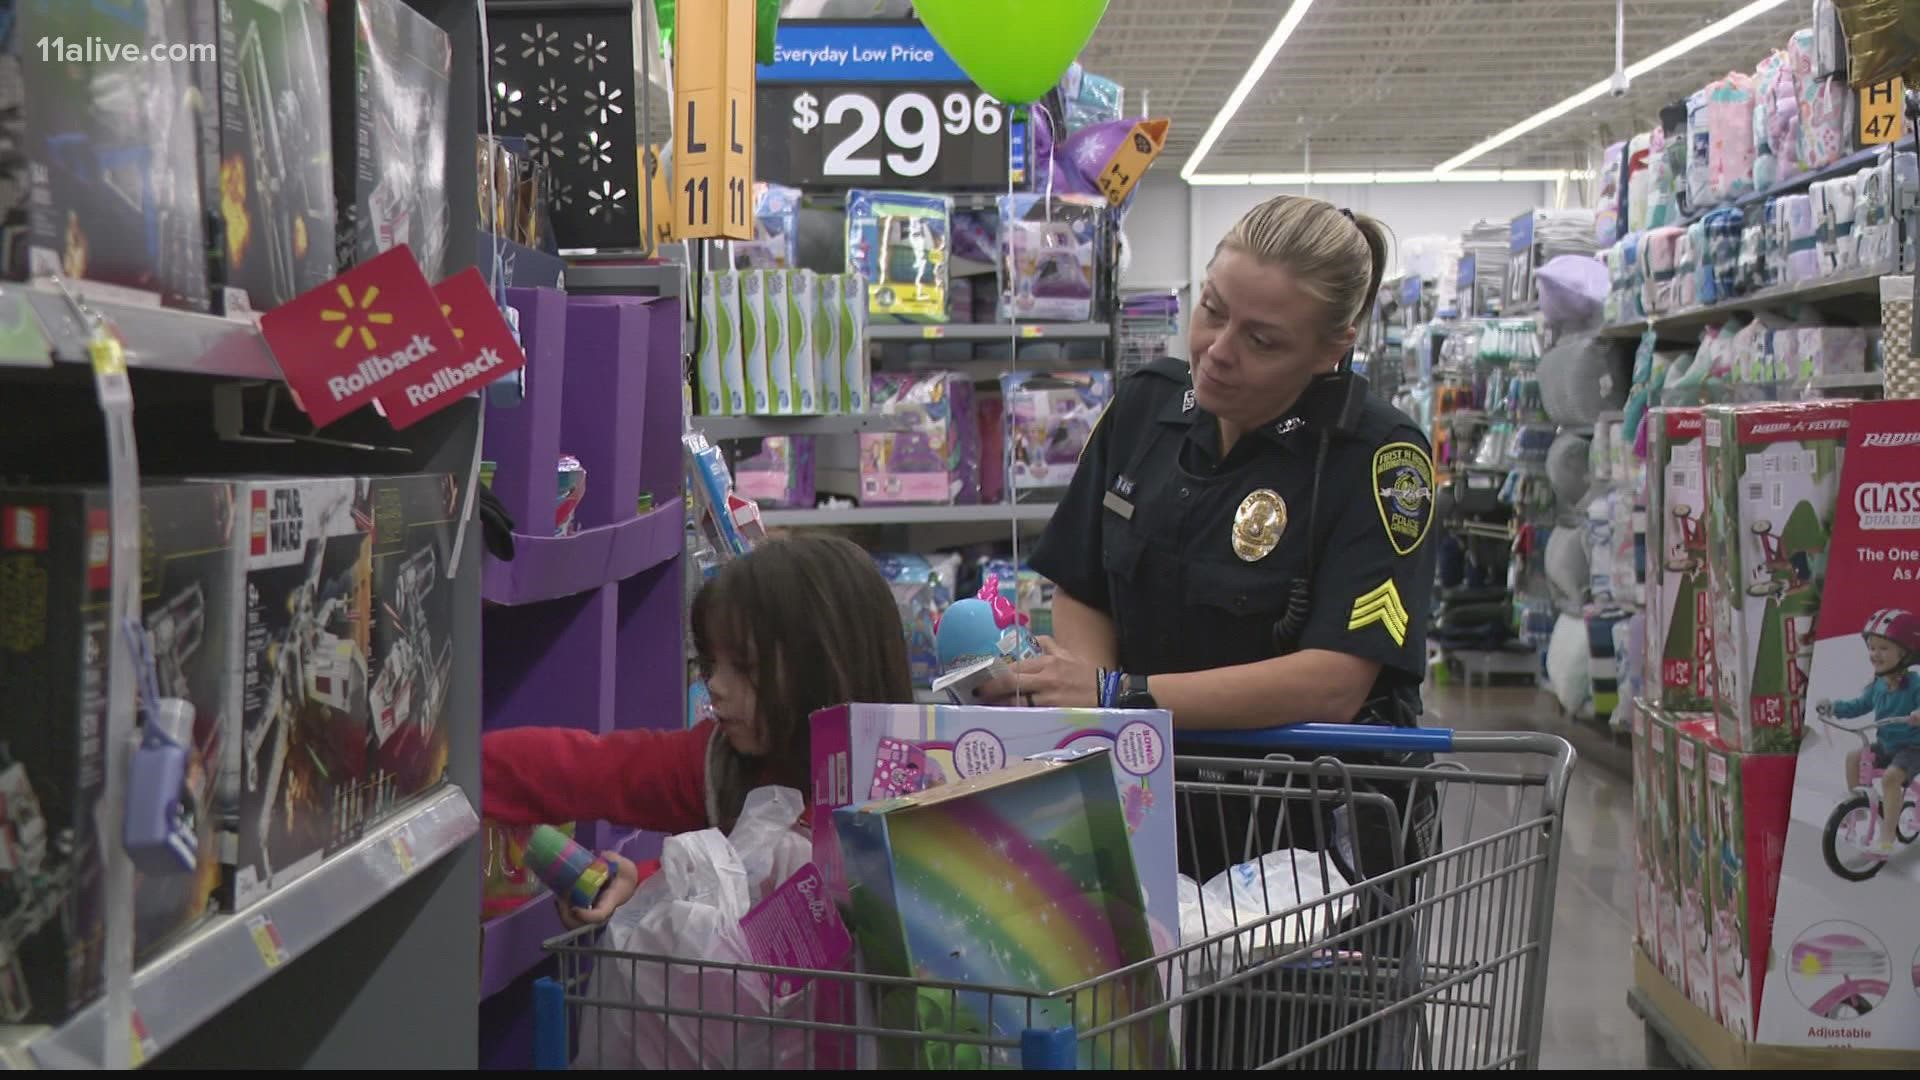 The annual Shop with a Cop program helps bring some holiday cheer to local kids.